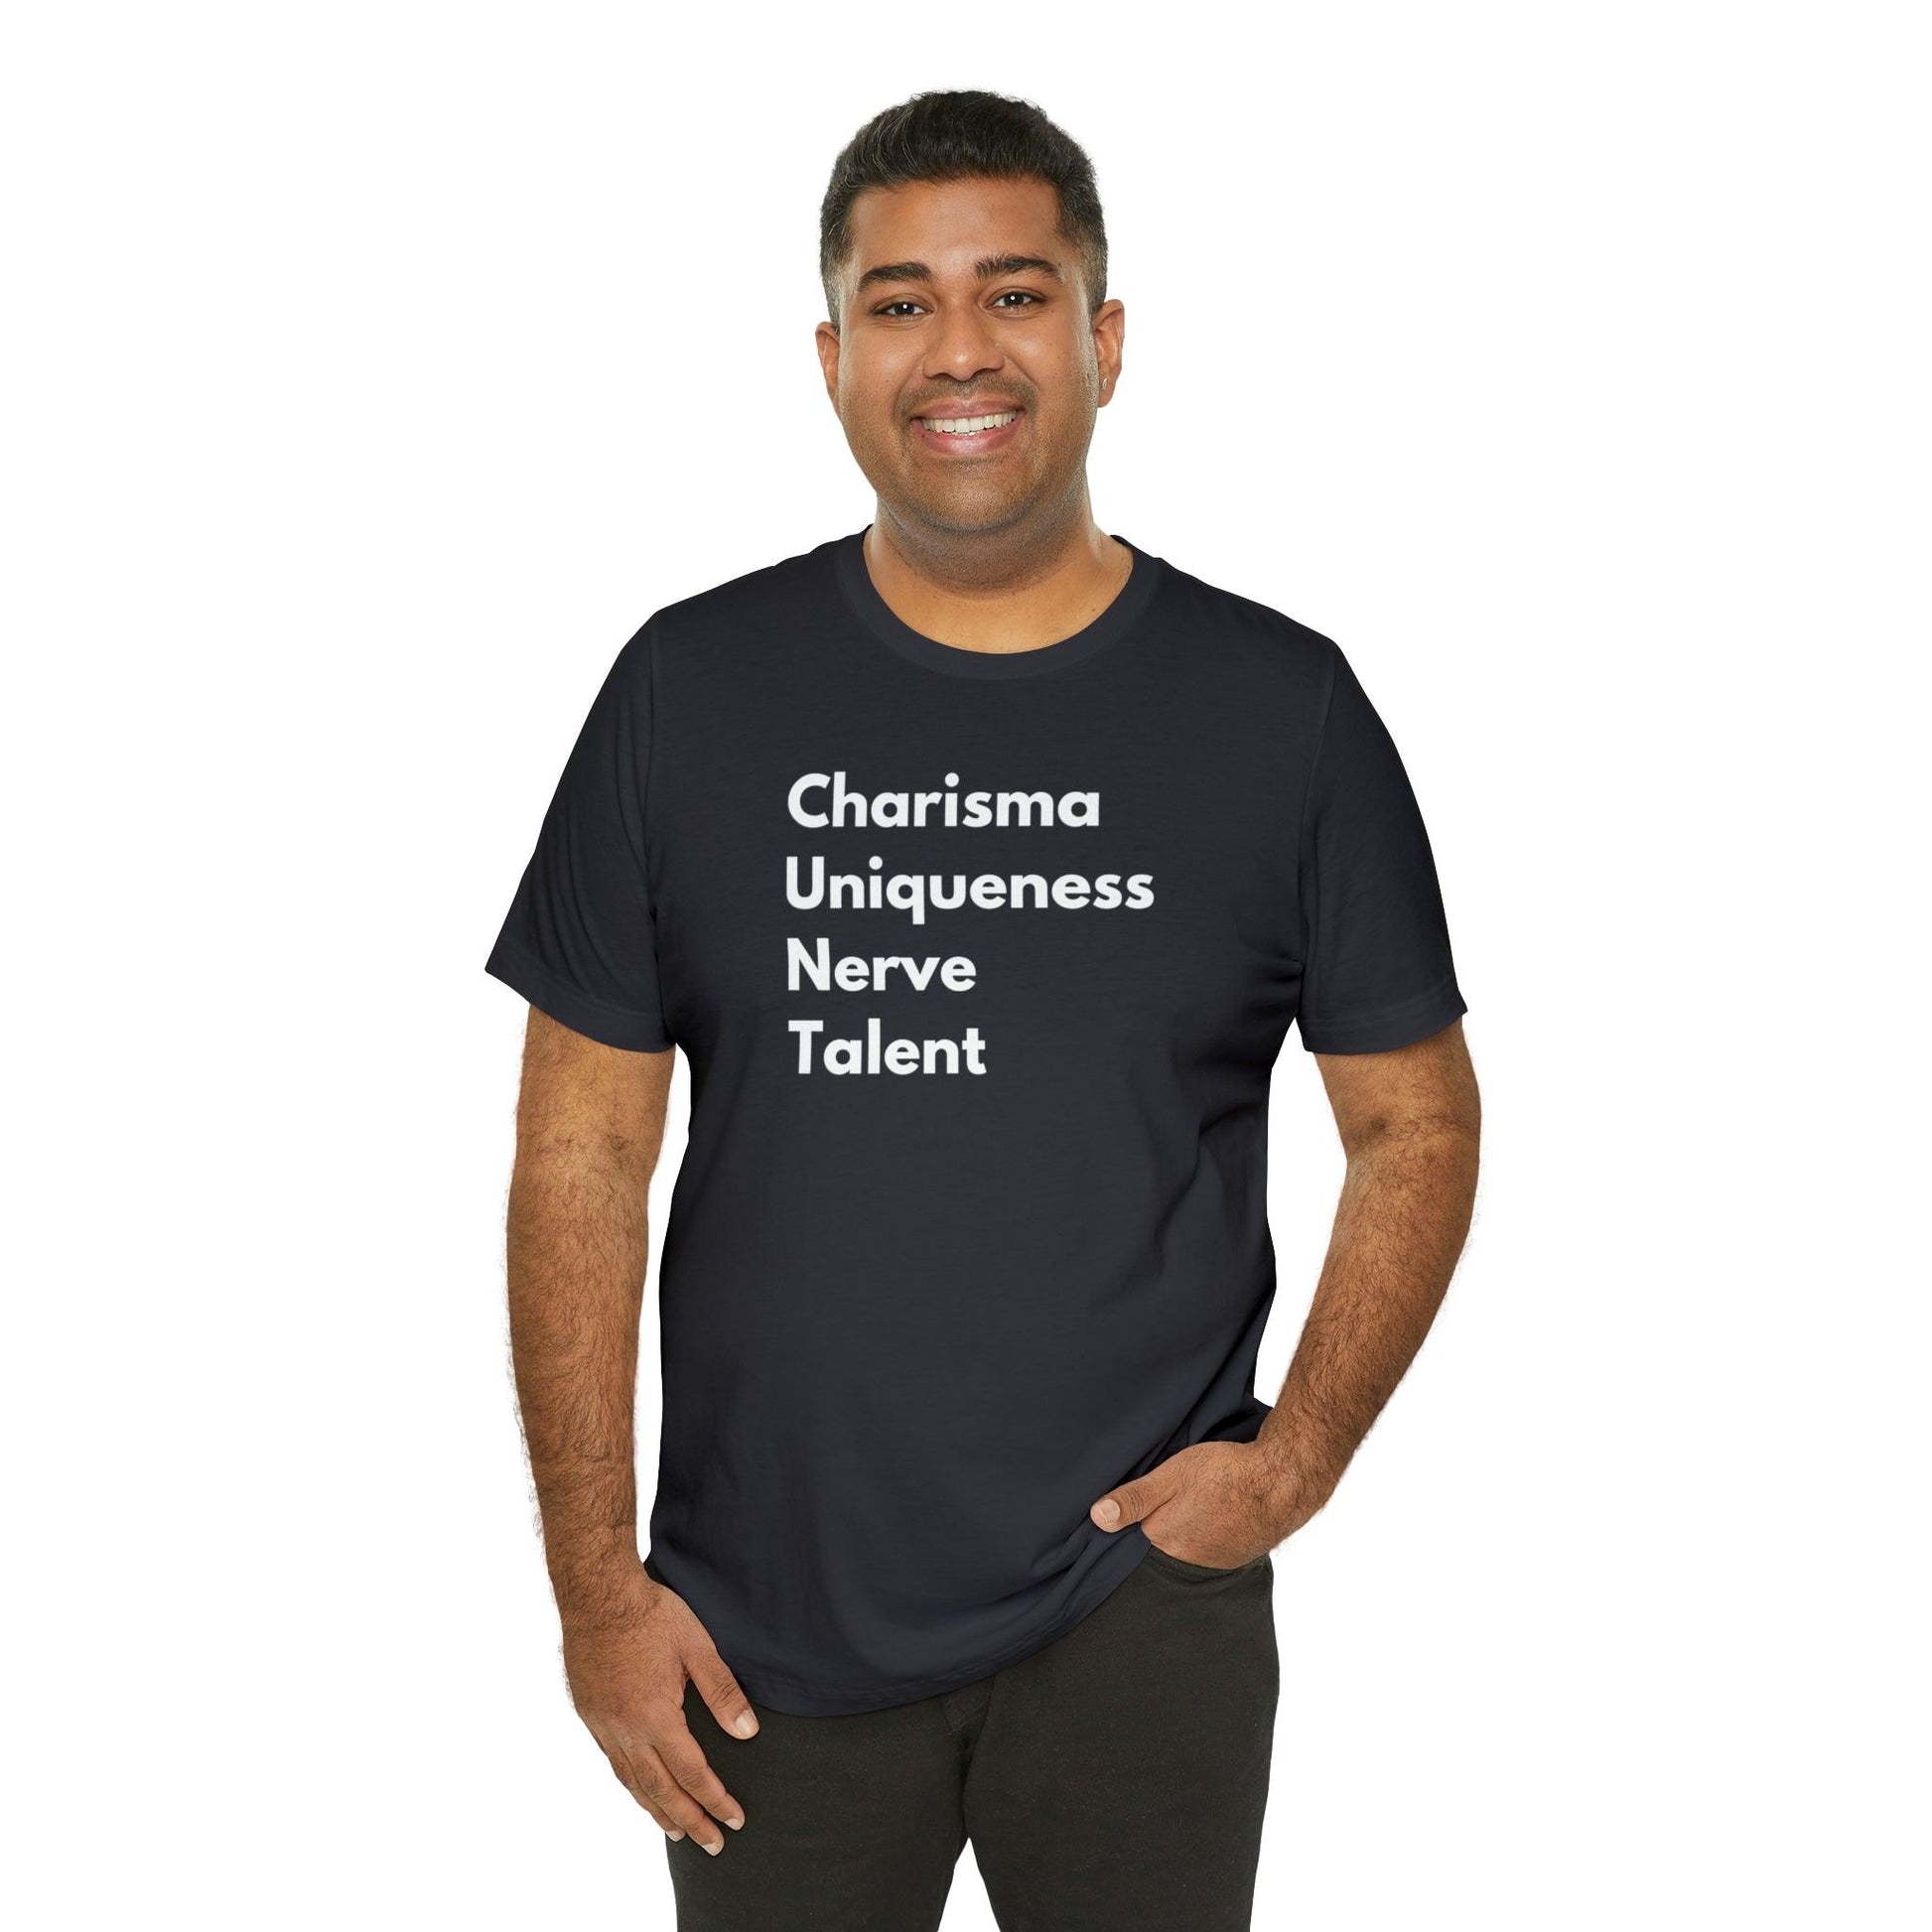 Charisma Uniqueness Nerve Talent (C.U.N.T.) - Wicked Naughty Apparel